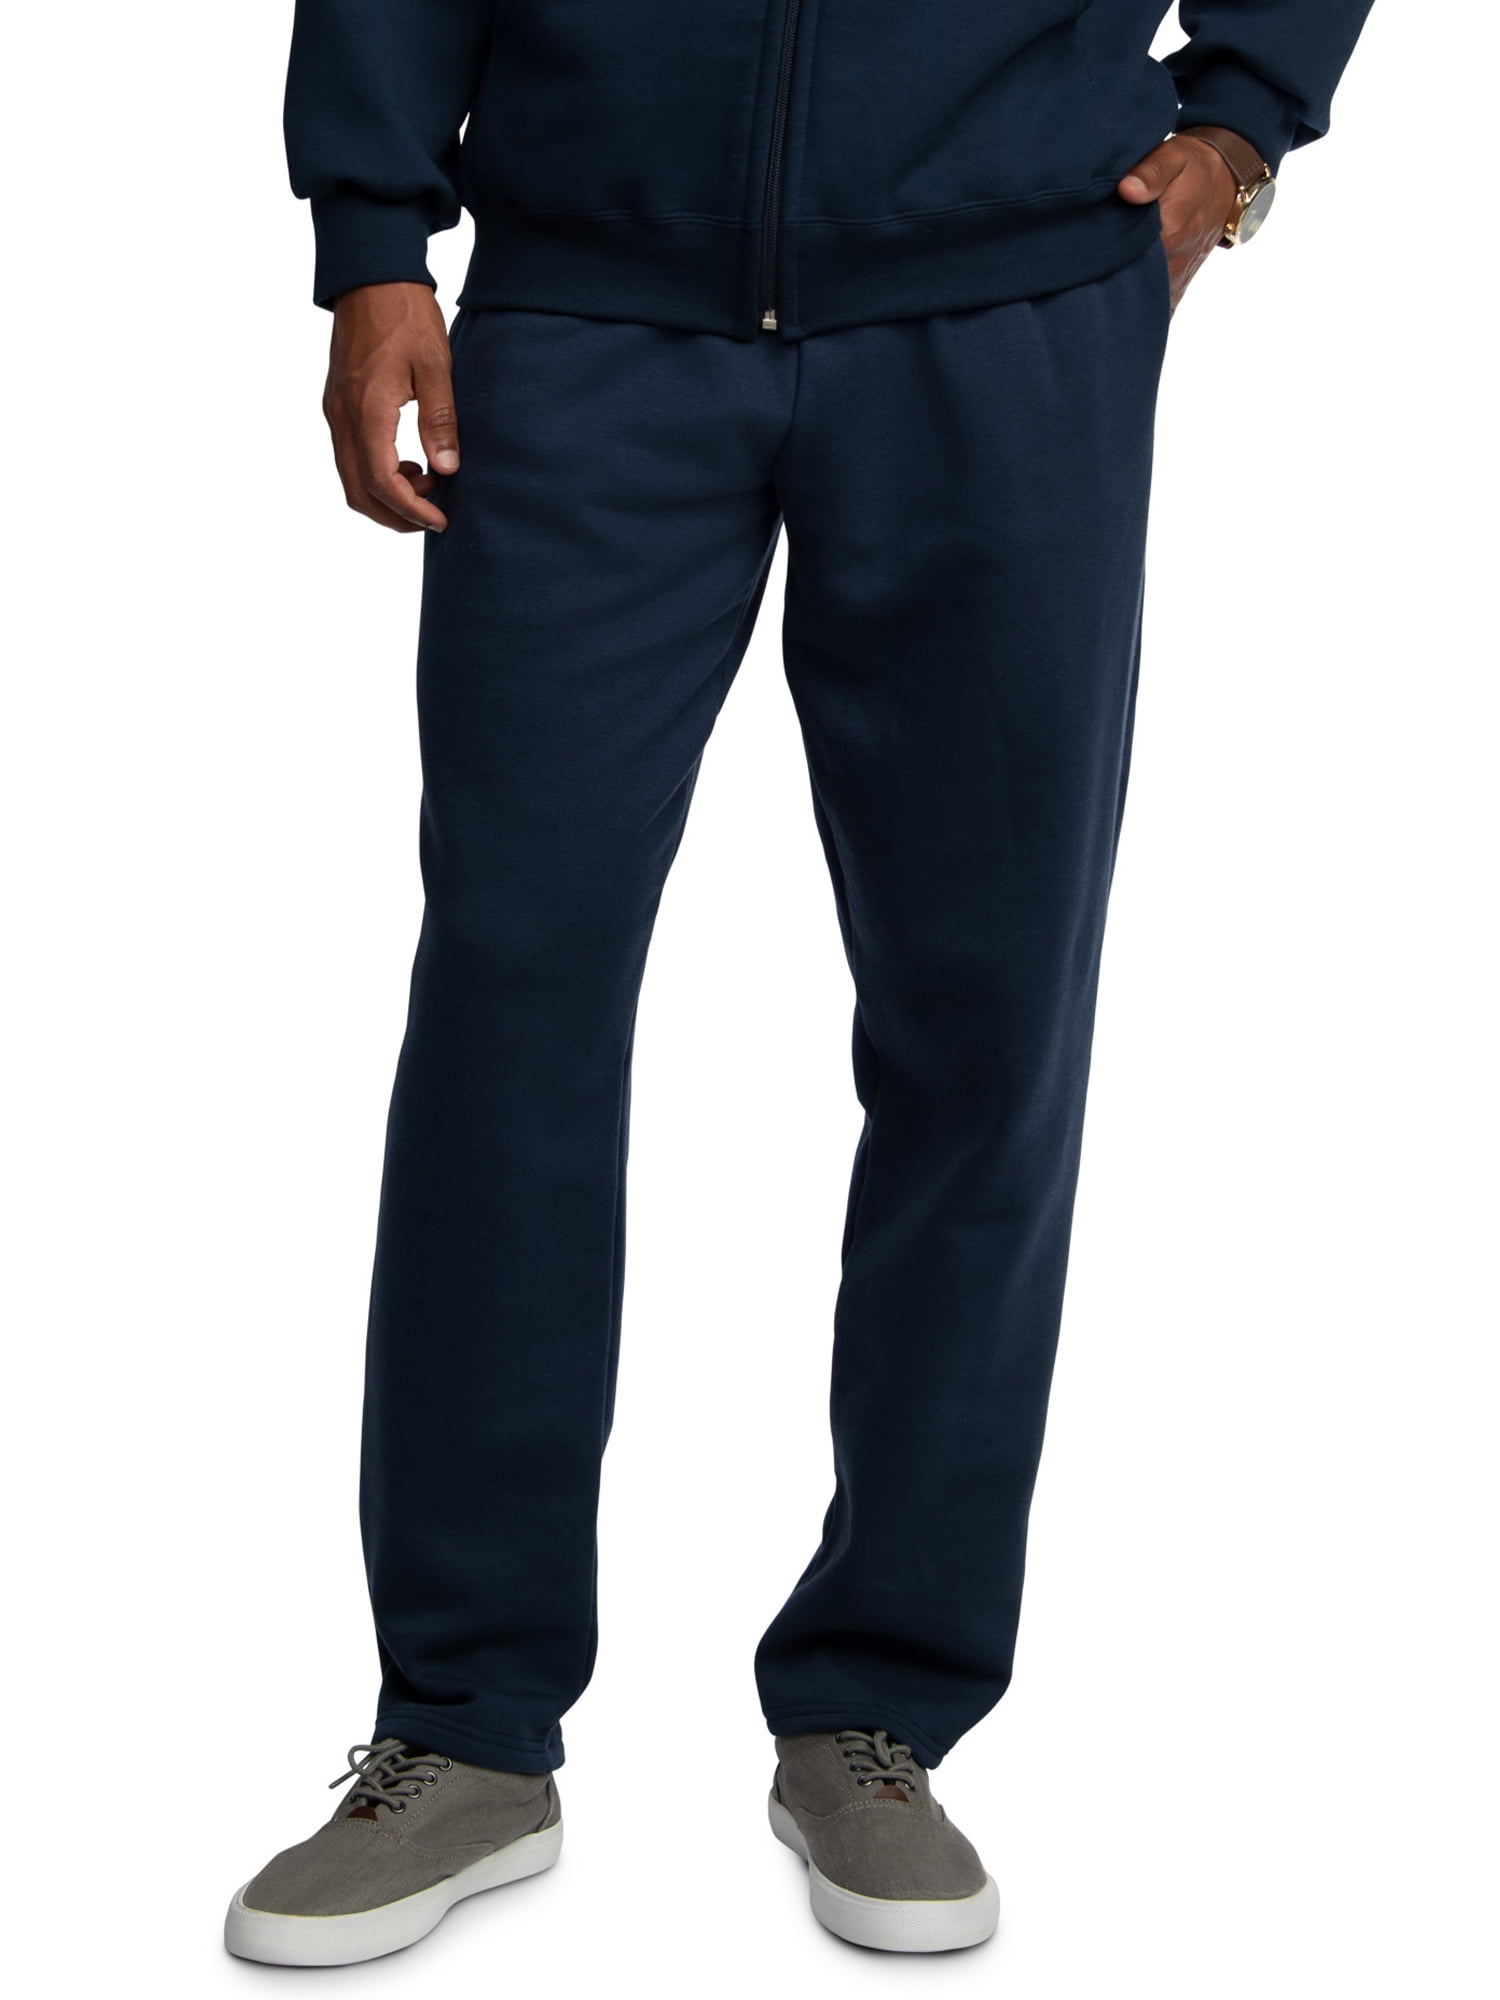 Men's Open Bottom Sweatpants ~ Variety of Colors – Grouch Gear